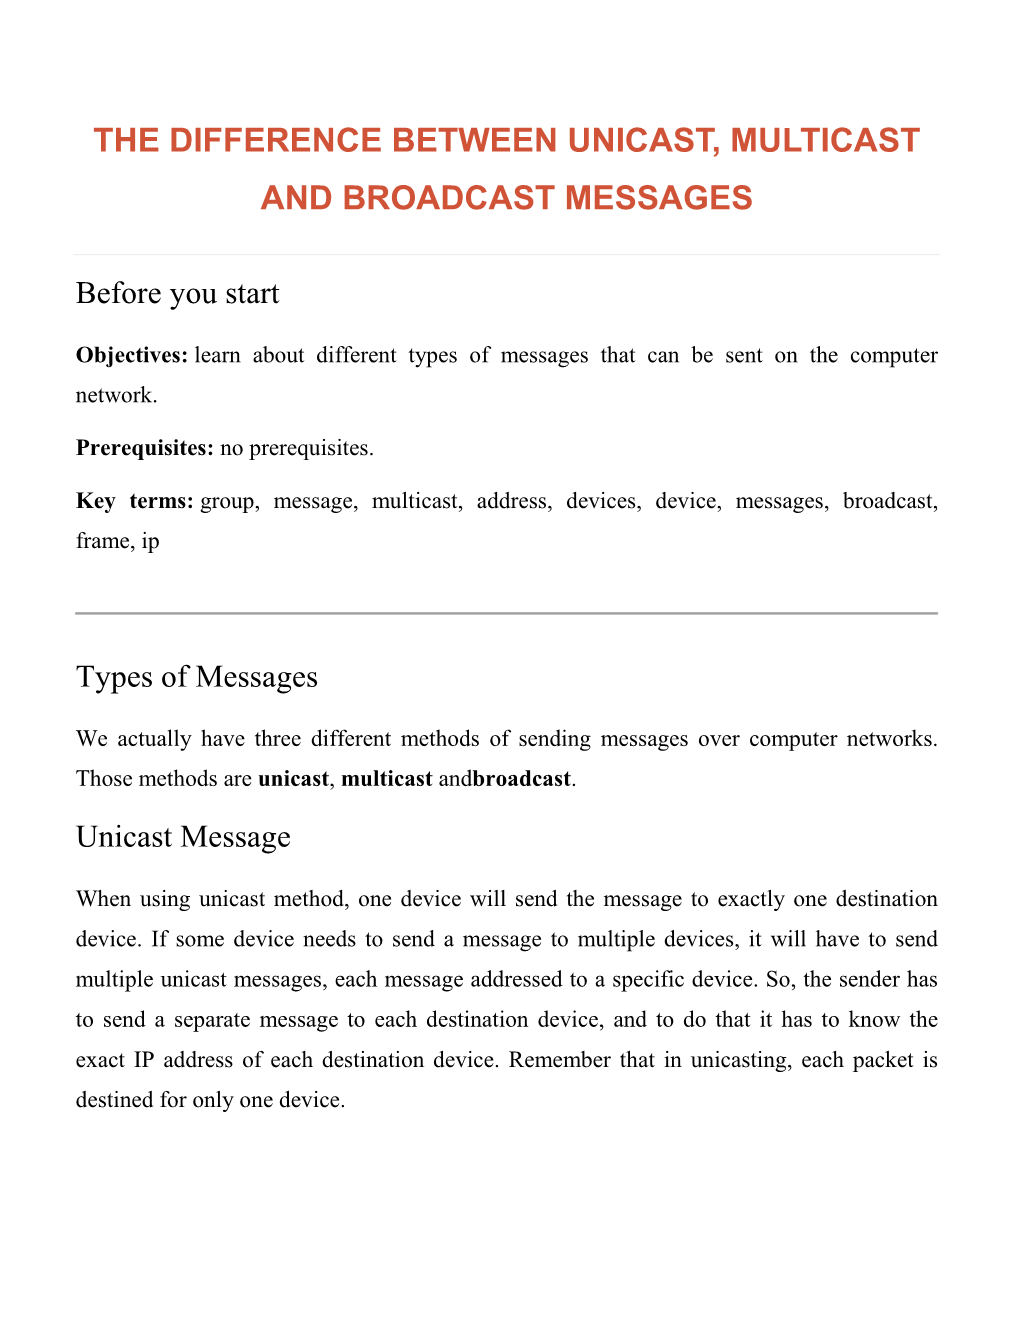 The Difference Between Unicast, Multicast and Broadcast Messages